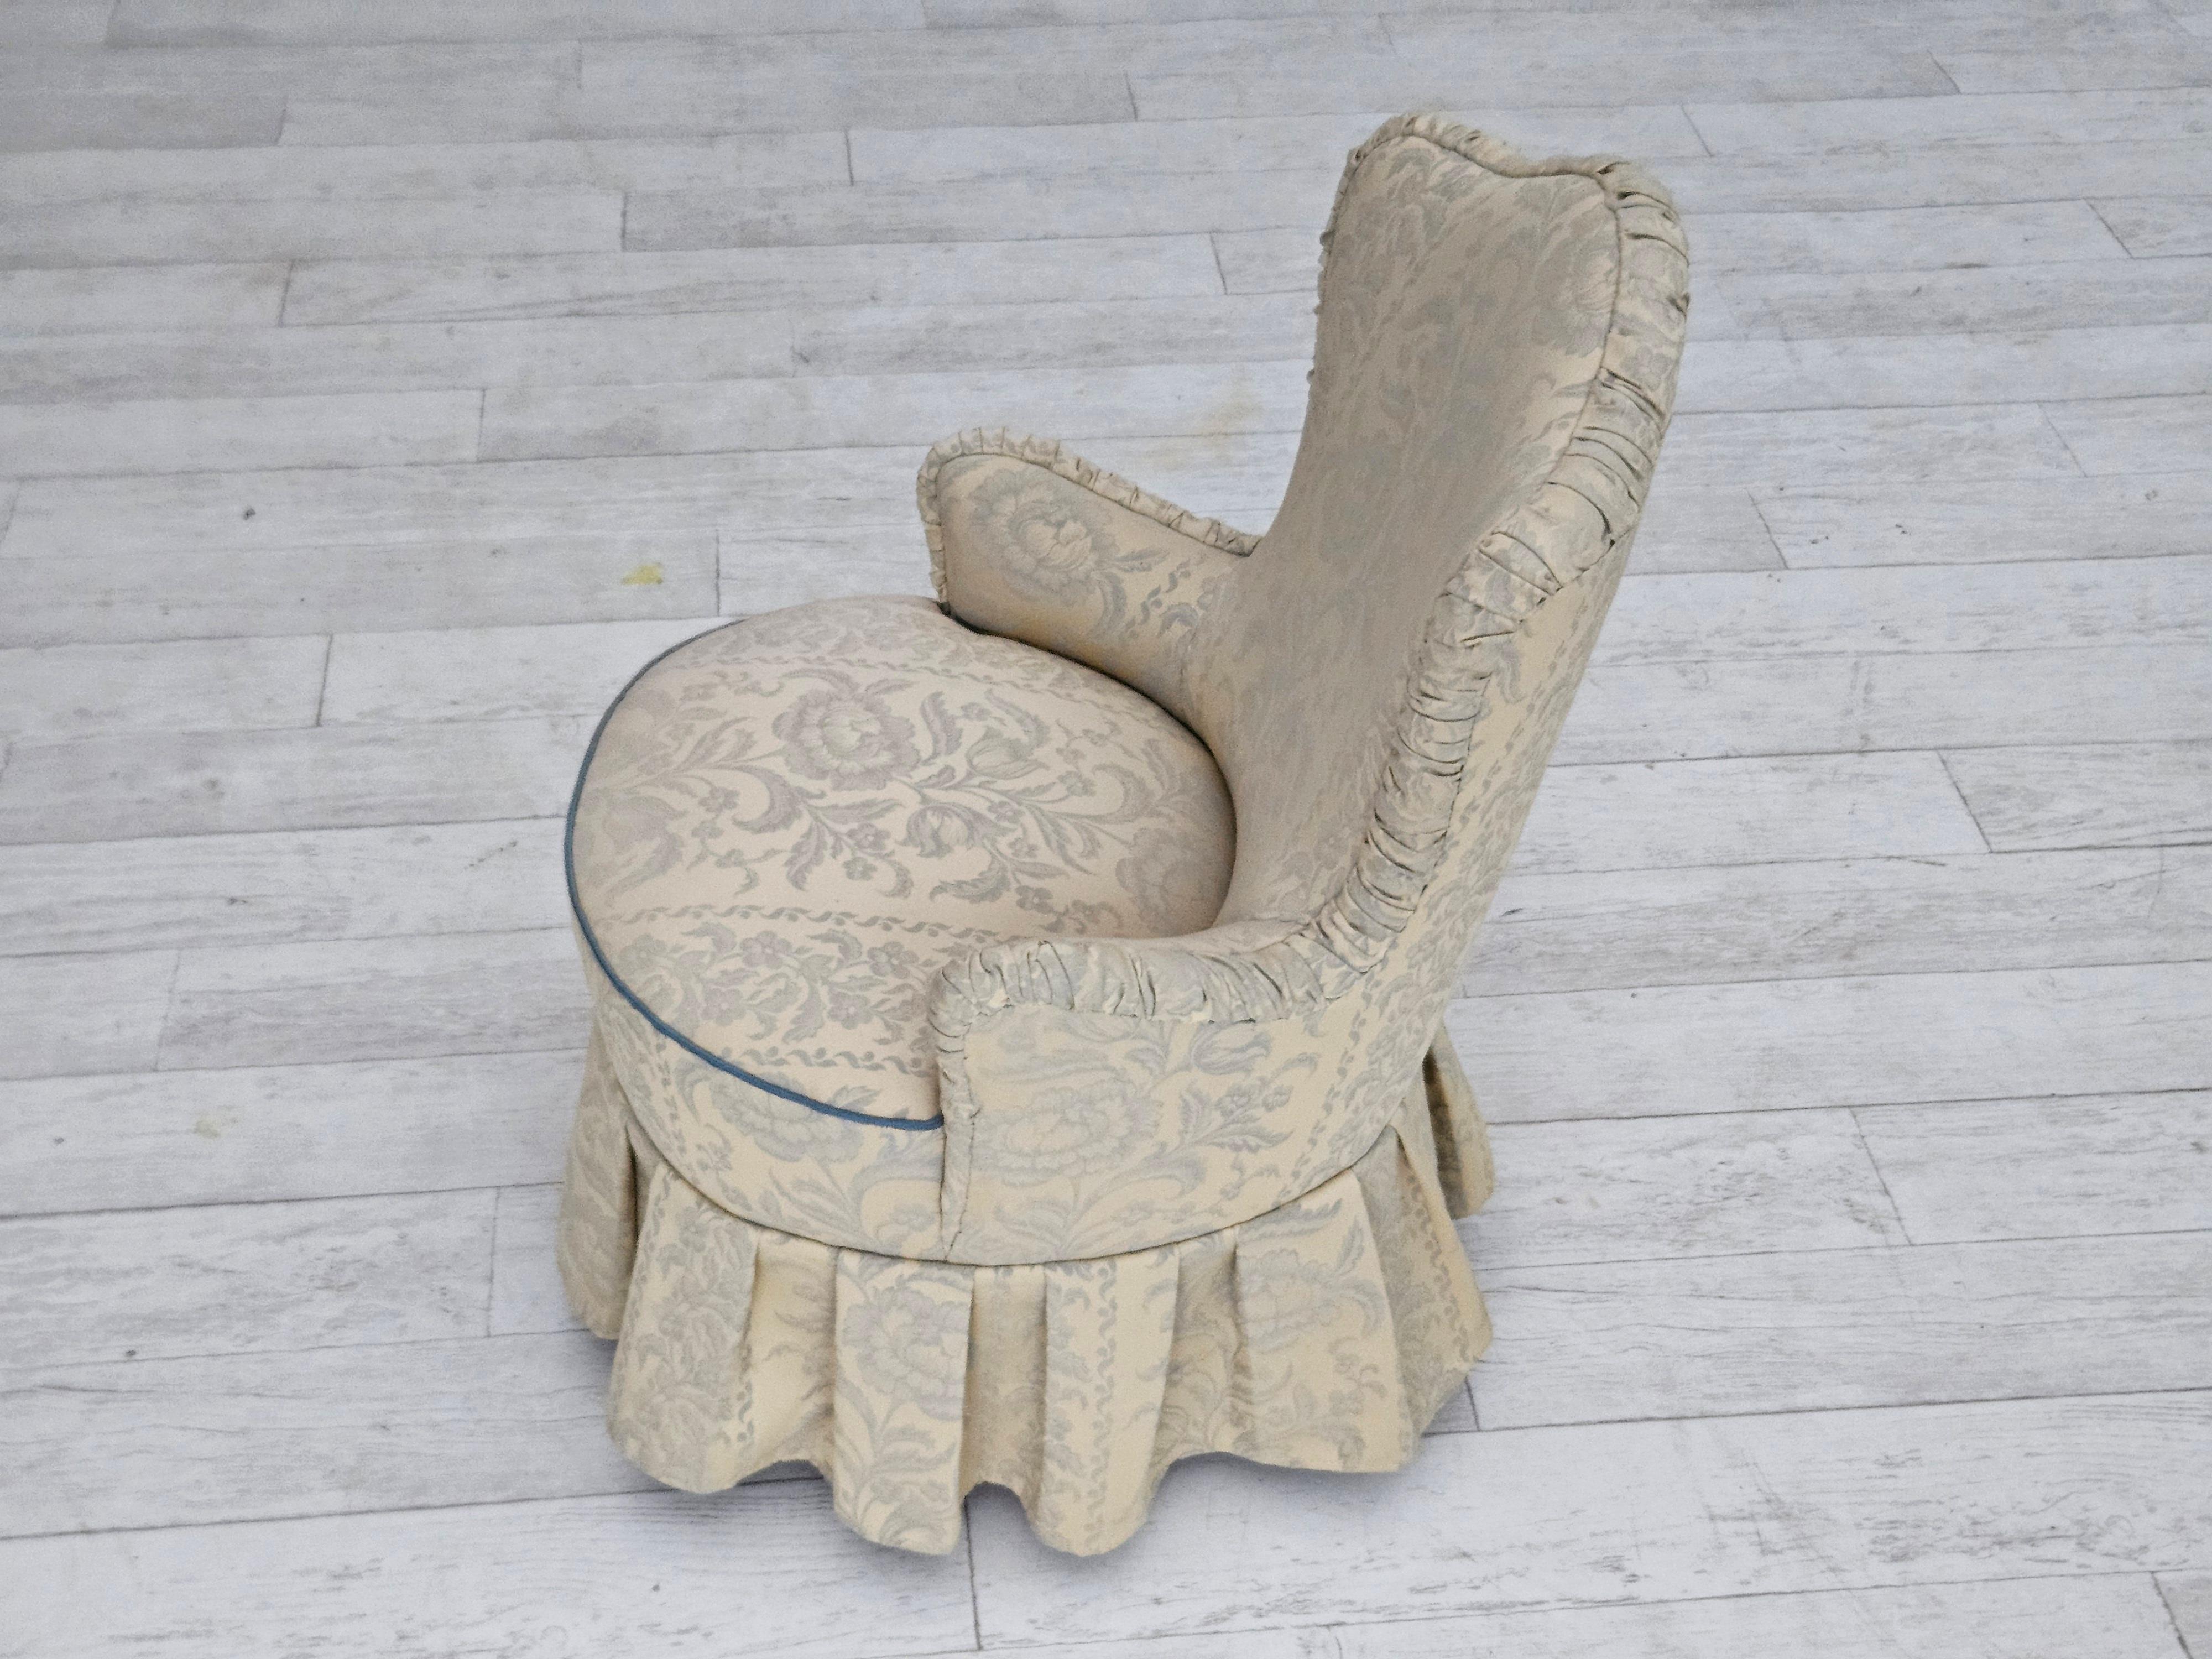 1950s, fauteuil Whiting, reupholstered, creamy/white floral fabric. en vente 6